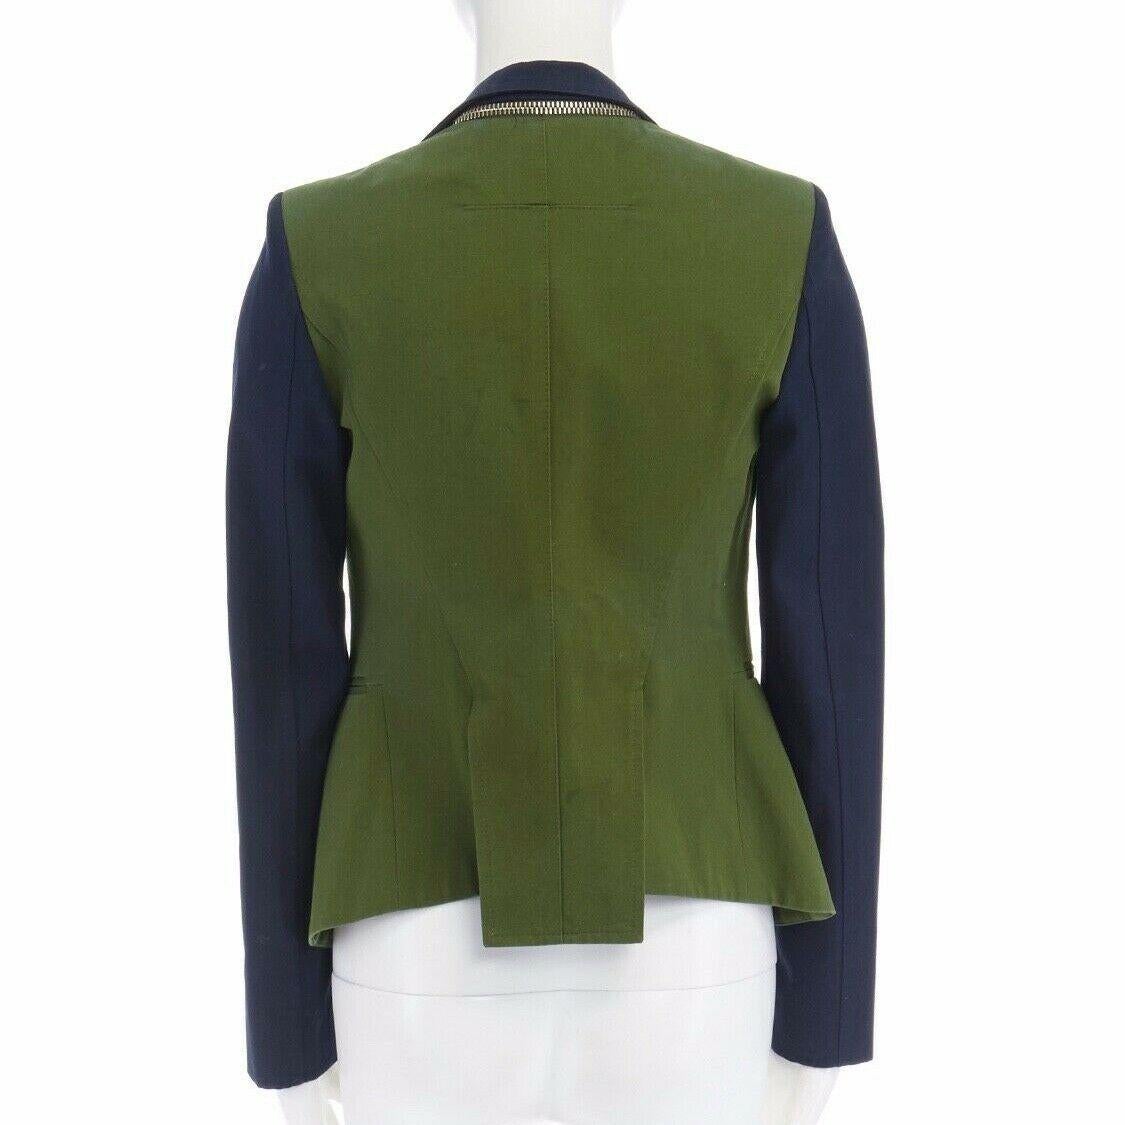 GIVENCHY TISCI military green navy blue sleeve zip collar cutaway jacket FR34 XS

GIVENCHY BY RICCARDO TISCI
Cotton, cupro, acetate, polyester . Military green body . Navy blue sleeves . 
Gold exposed zipper detail on collar . Spread notched collar